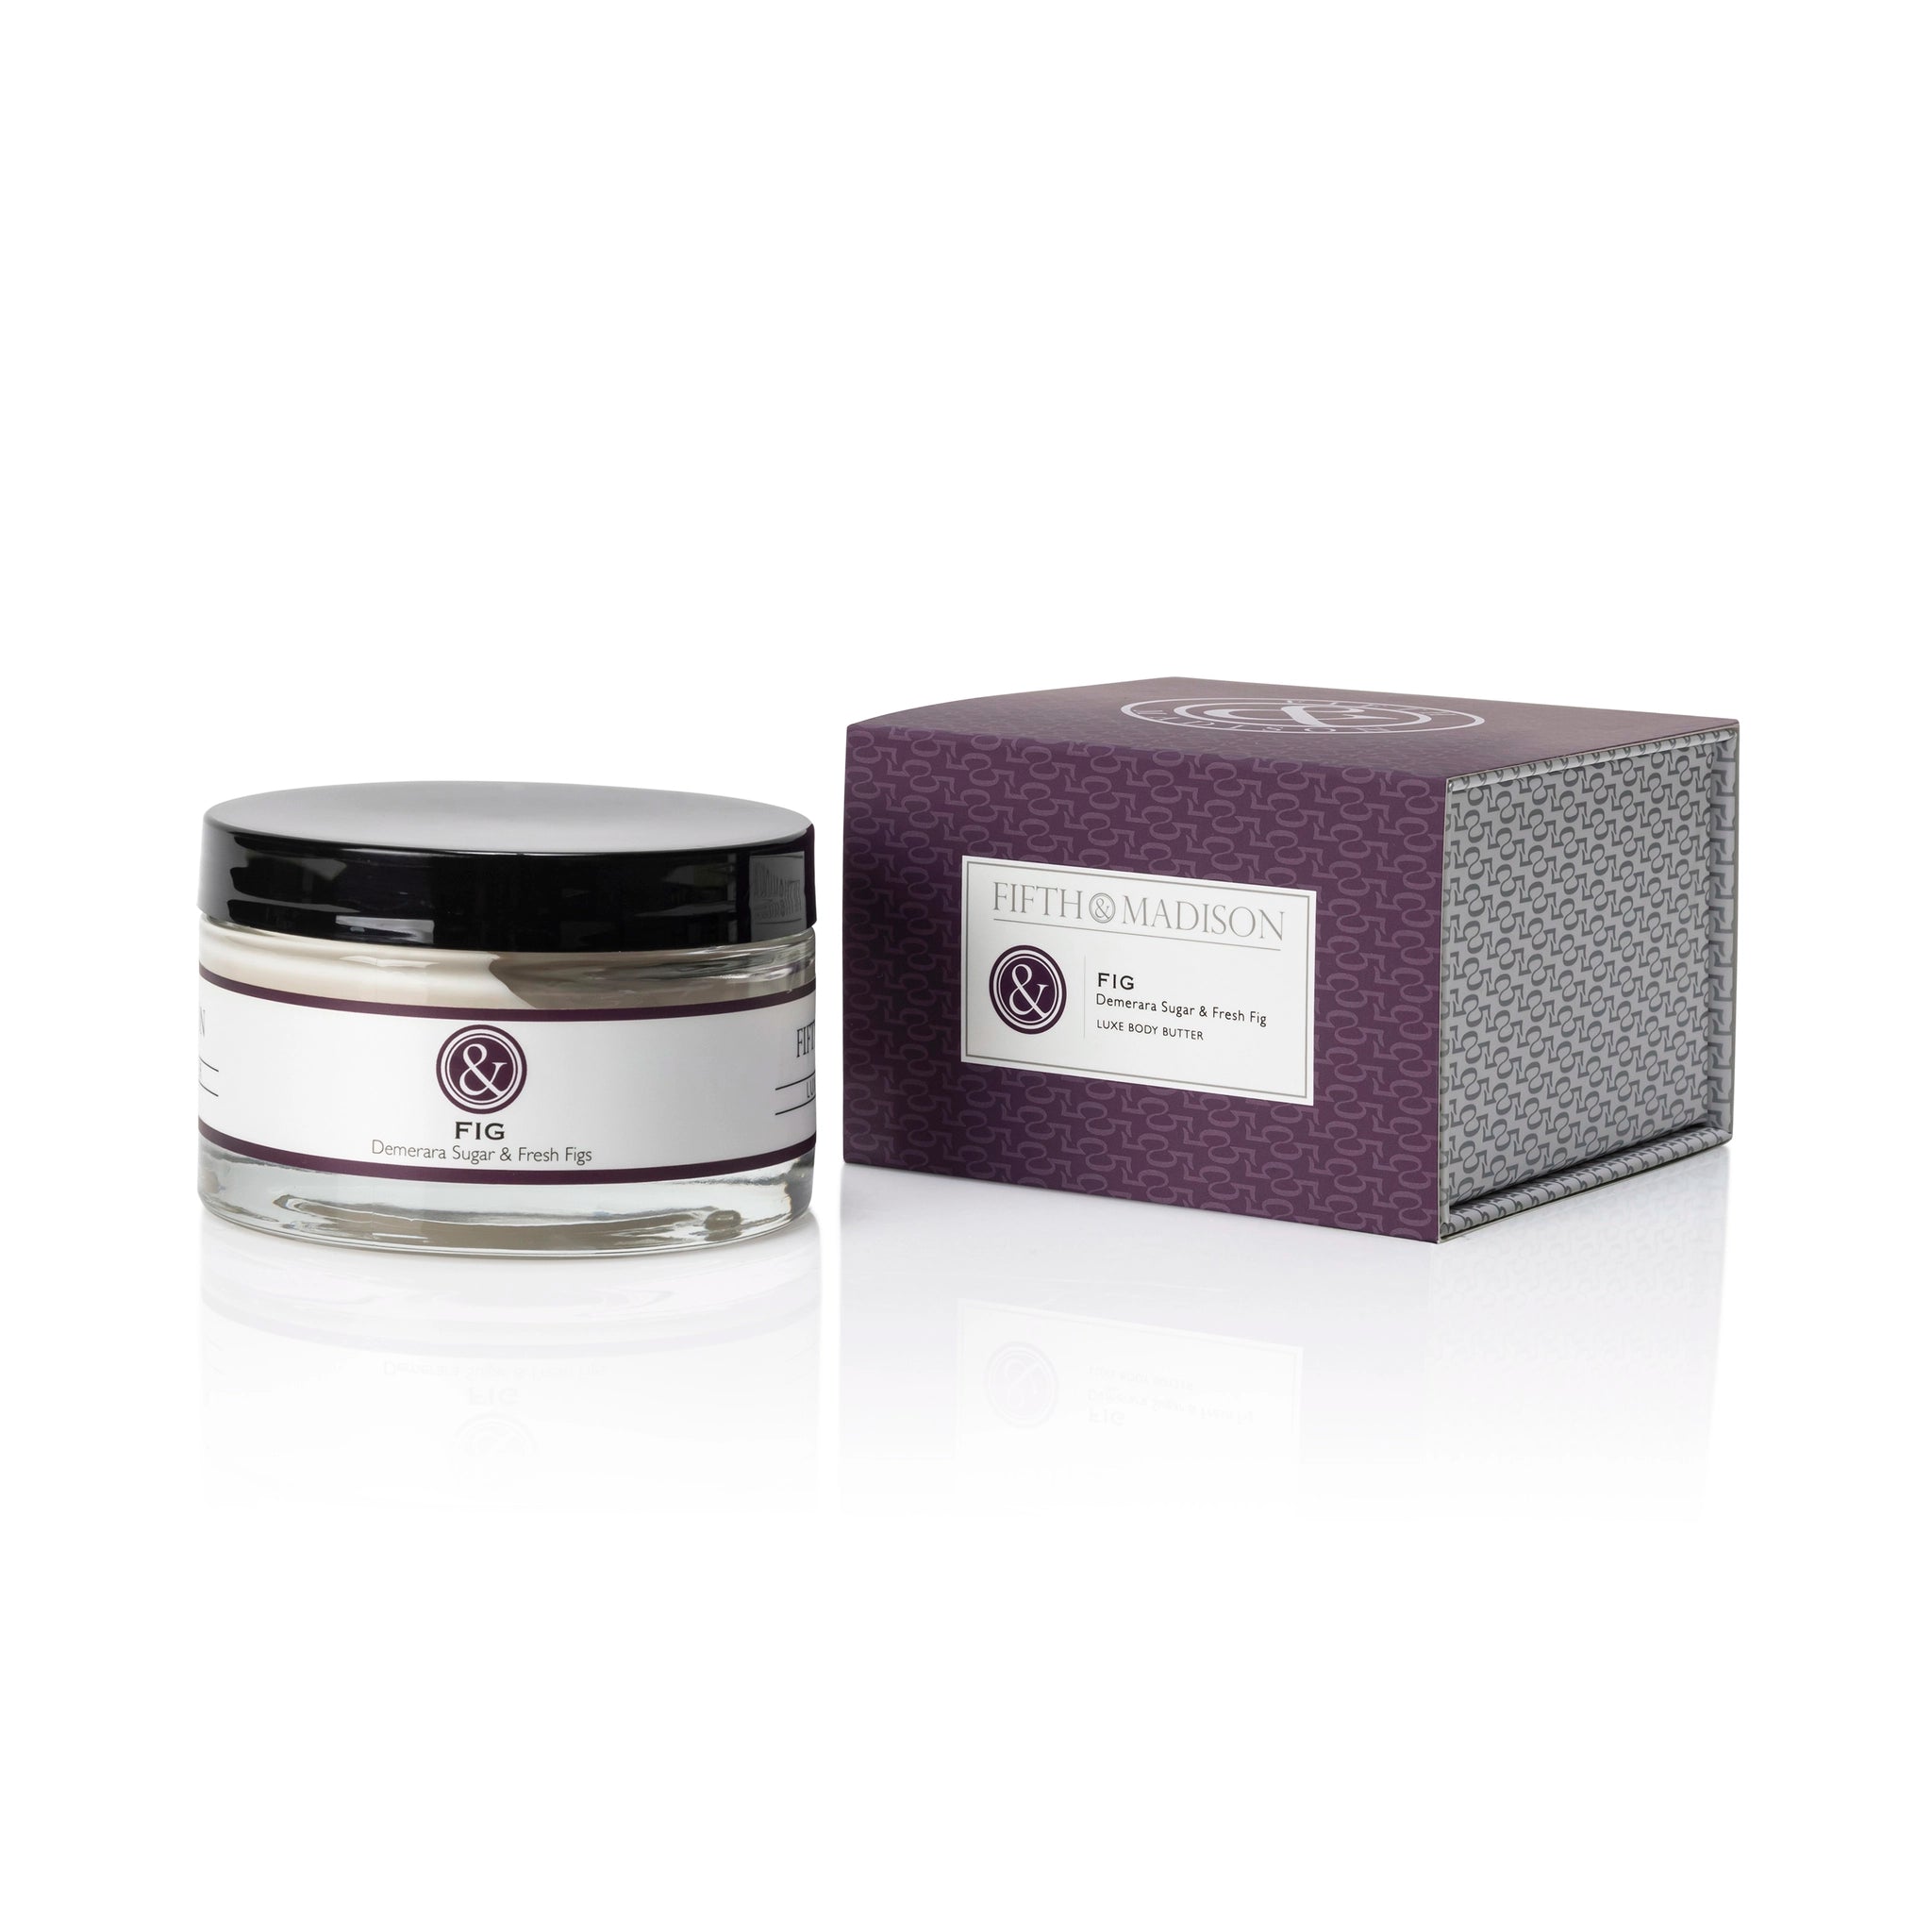 Fig 5th & Madison Luxe Body Butter